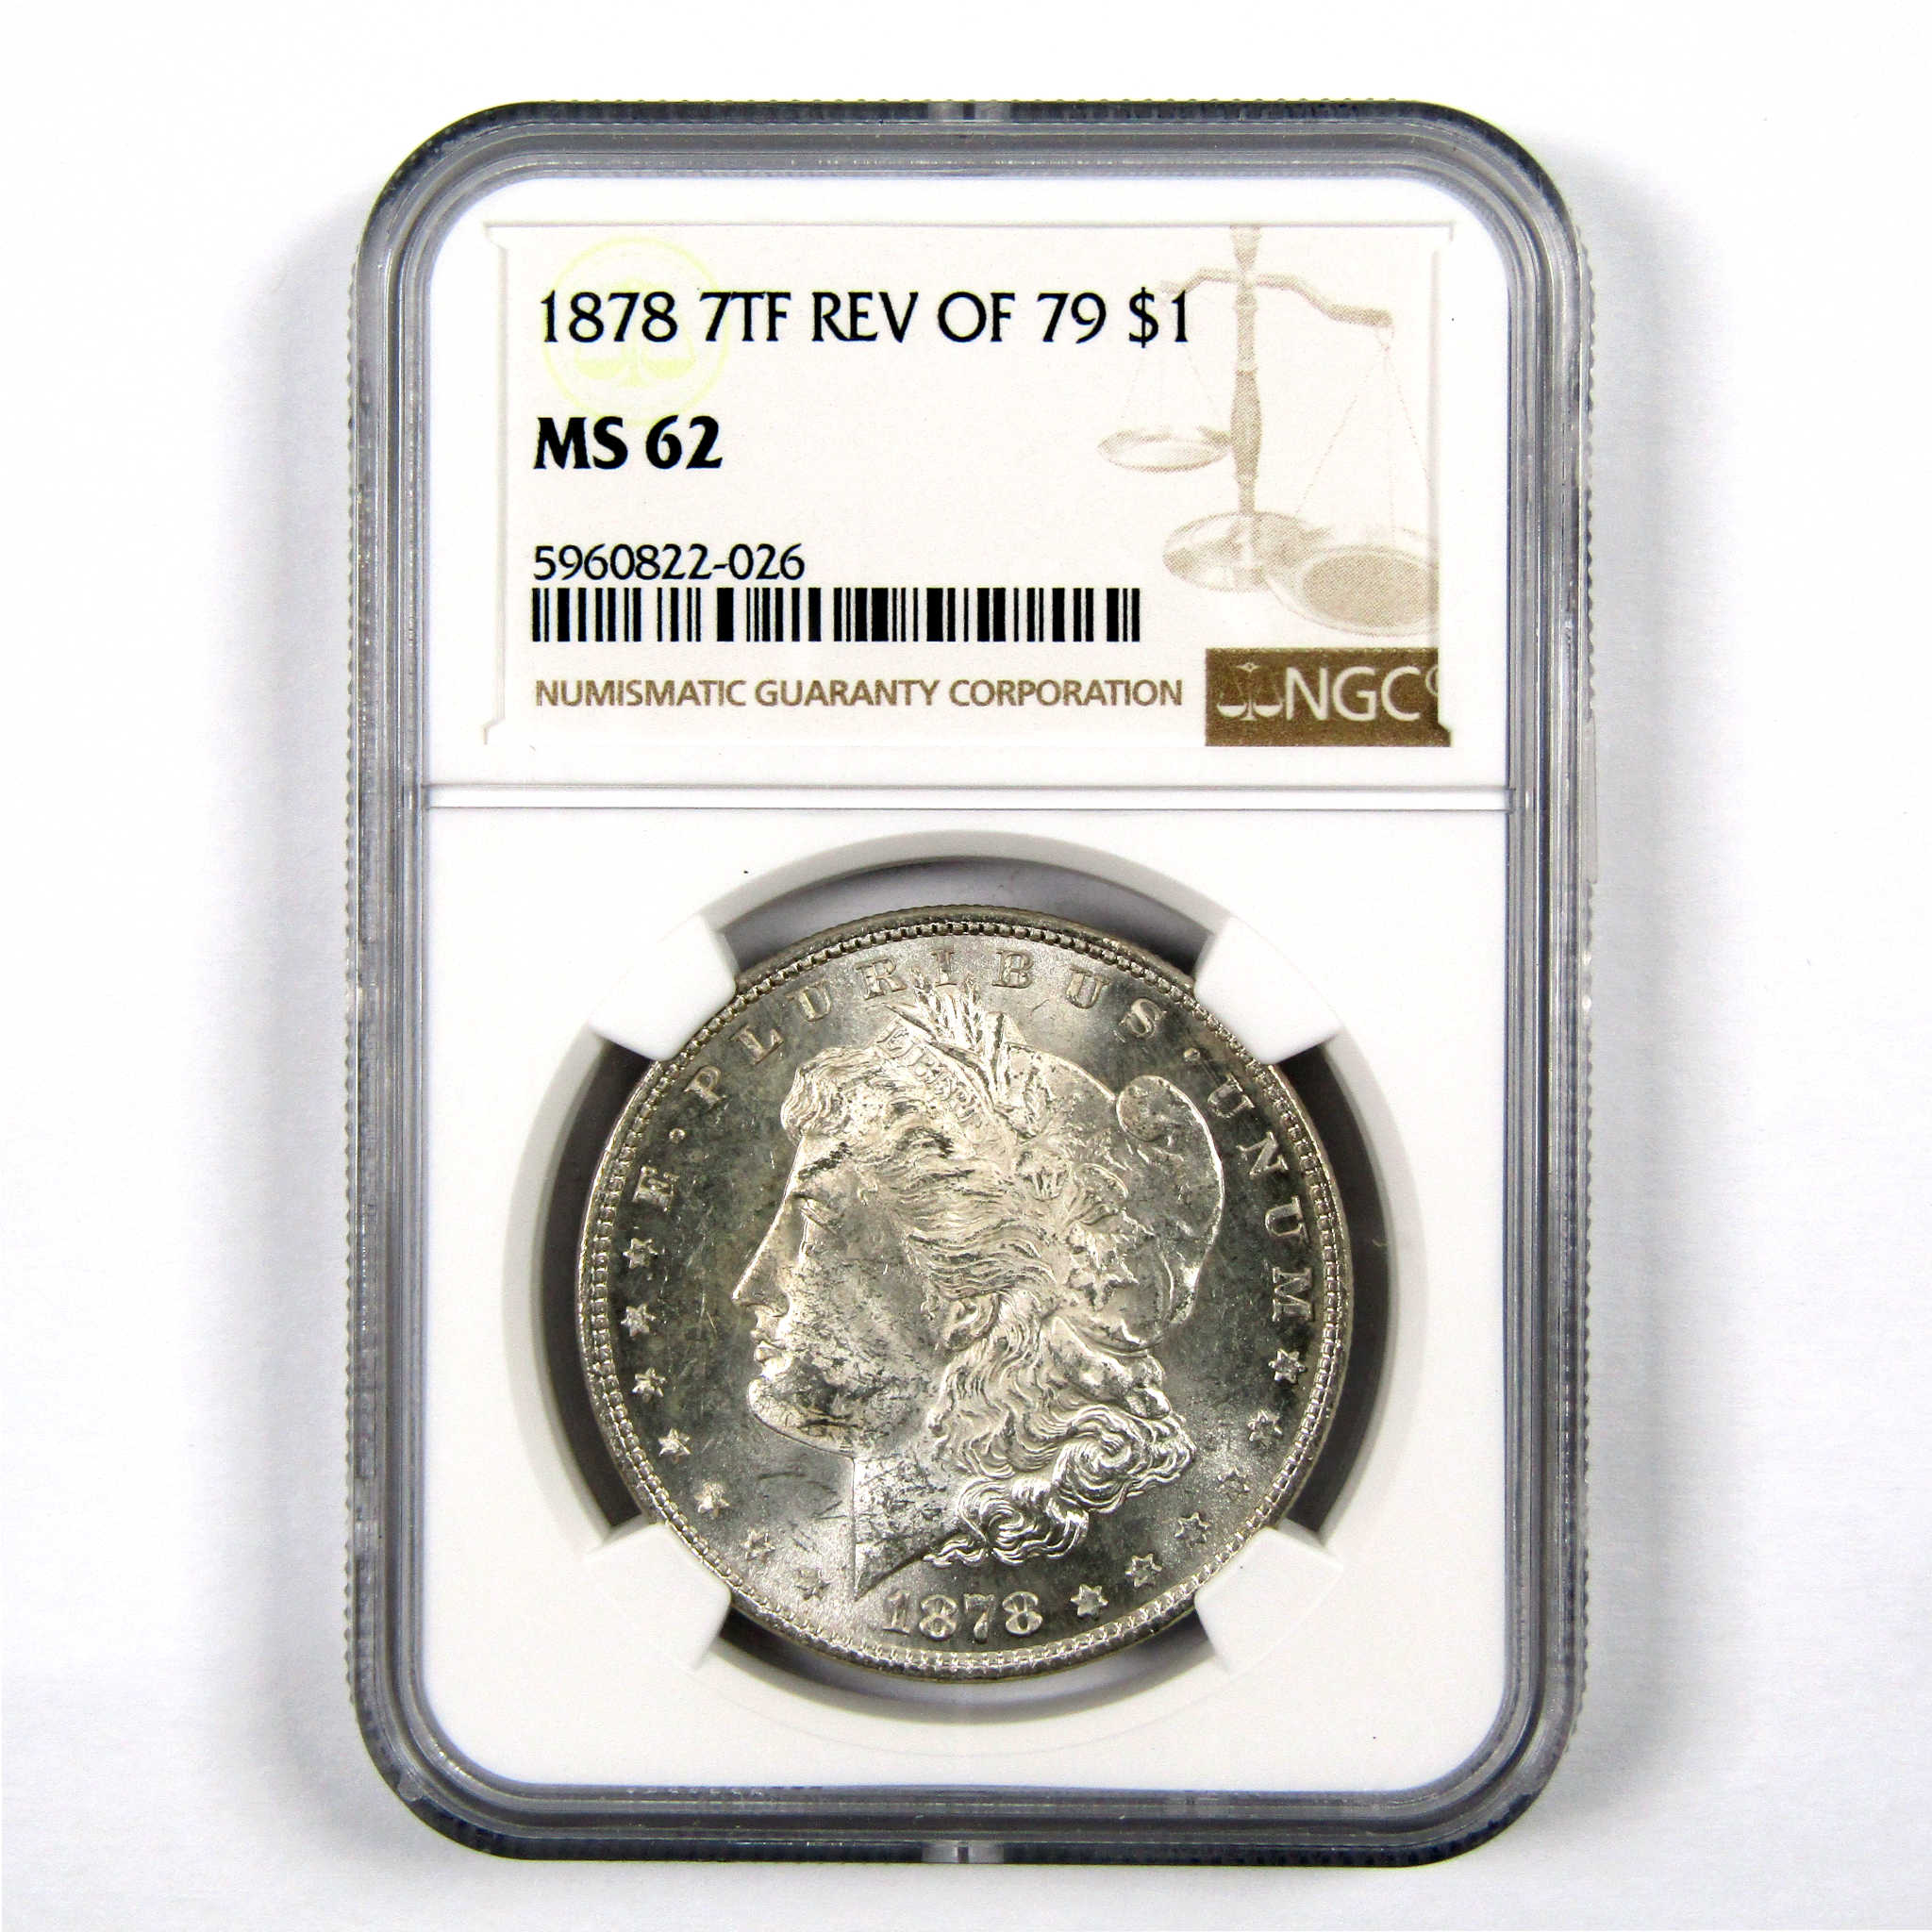 1878 7TF Rev 79 Morgan Dollar MS 62 NGC 90% Silver $1 Unc SKU:I9220 - Morgan coin - Morgan silver dollar - Morgan silver dollar for sale - Profile Coins &amp; Collectibles